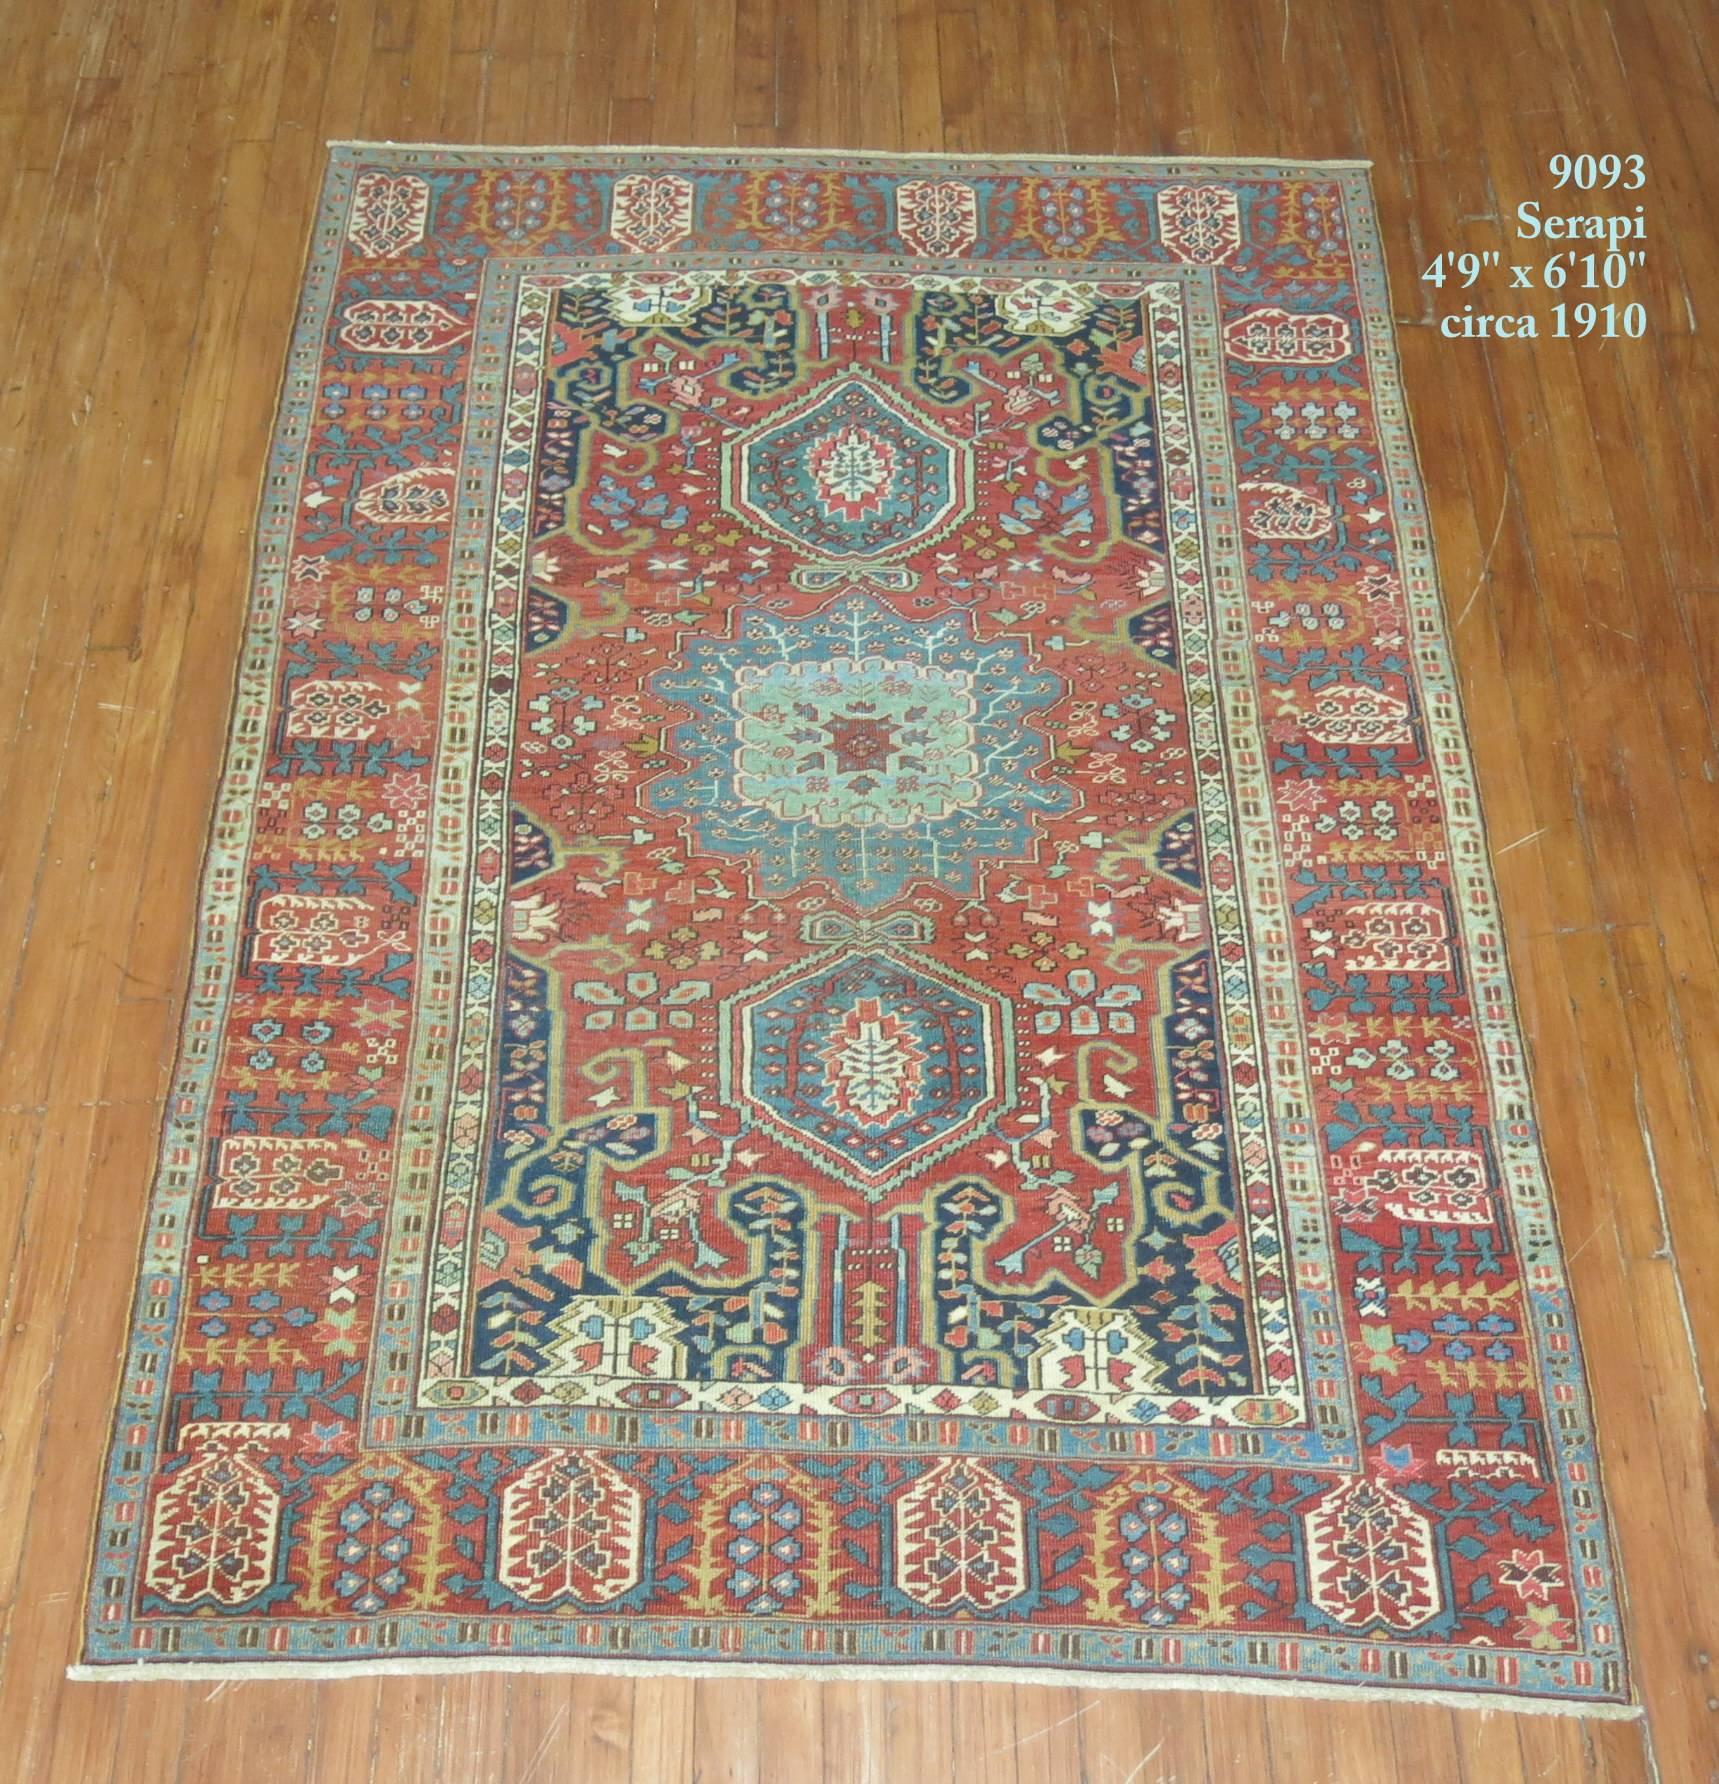 A highly decorative rare size Persian Antique Serapi rug.

4'9'' x 6'10''

With distinctive large-scale motifs and a wide ranging palette of warm colors, antique Heriz Serapi carpet are currently the most popular Persian village tribal carpets